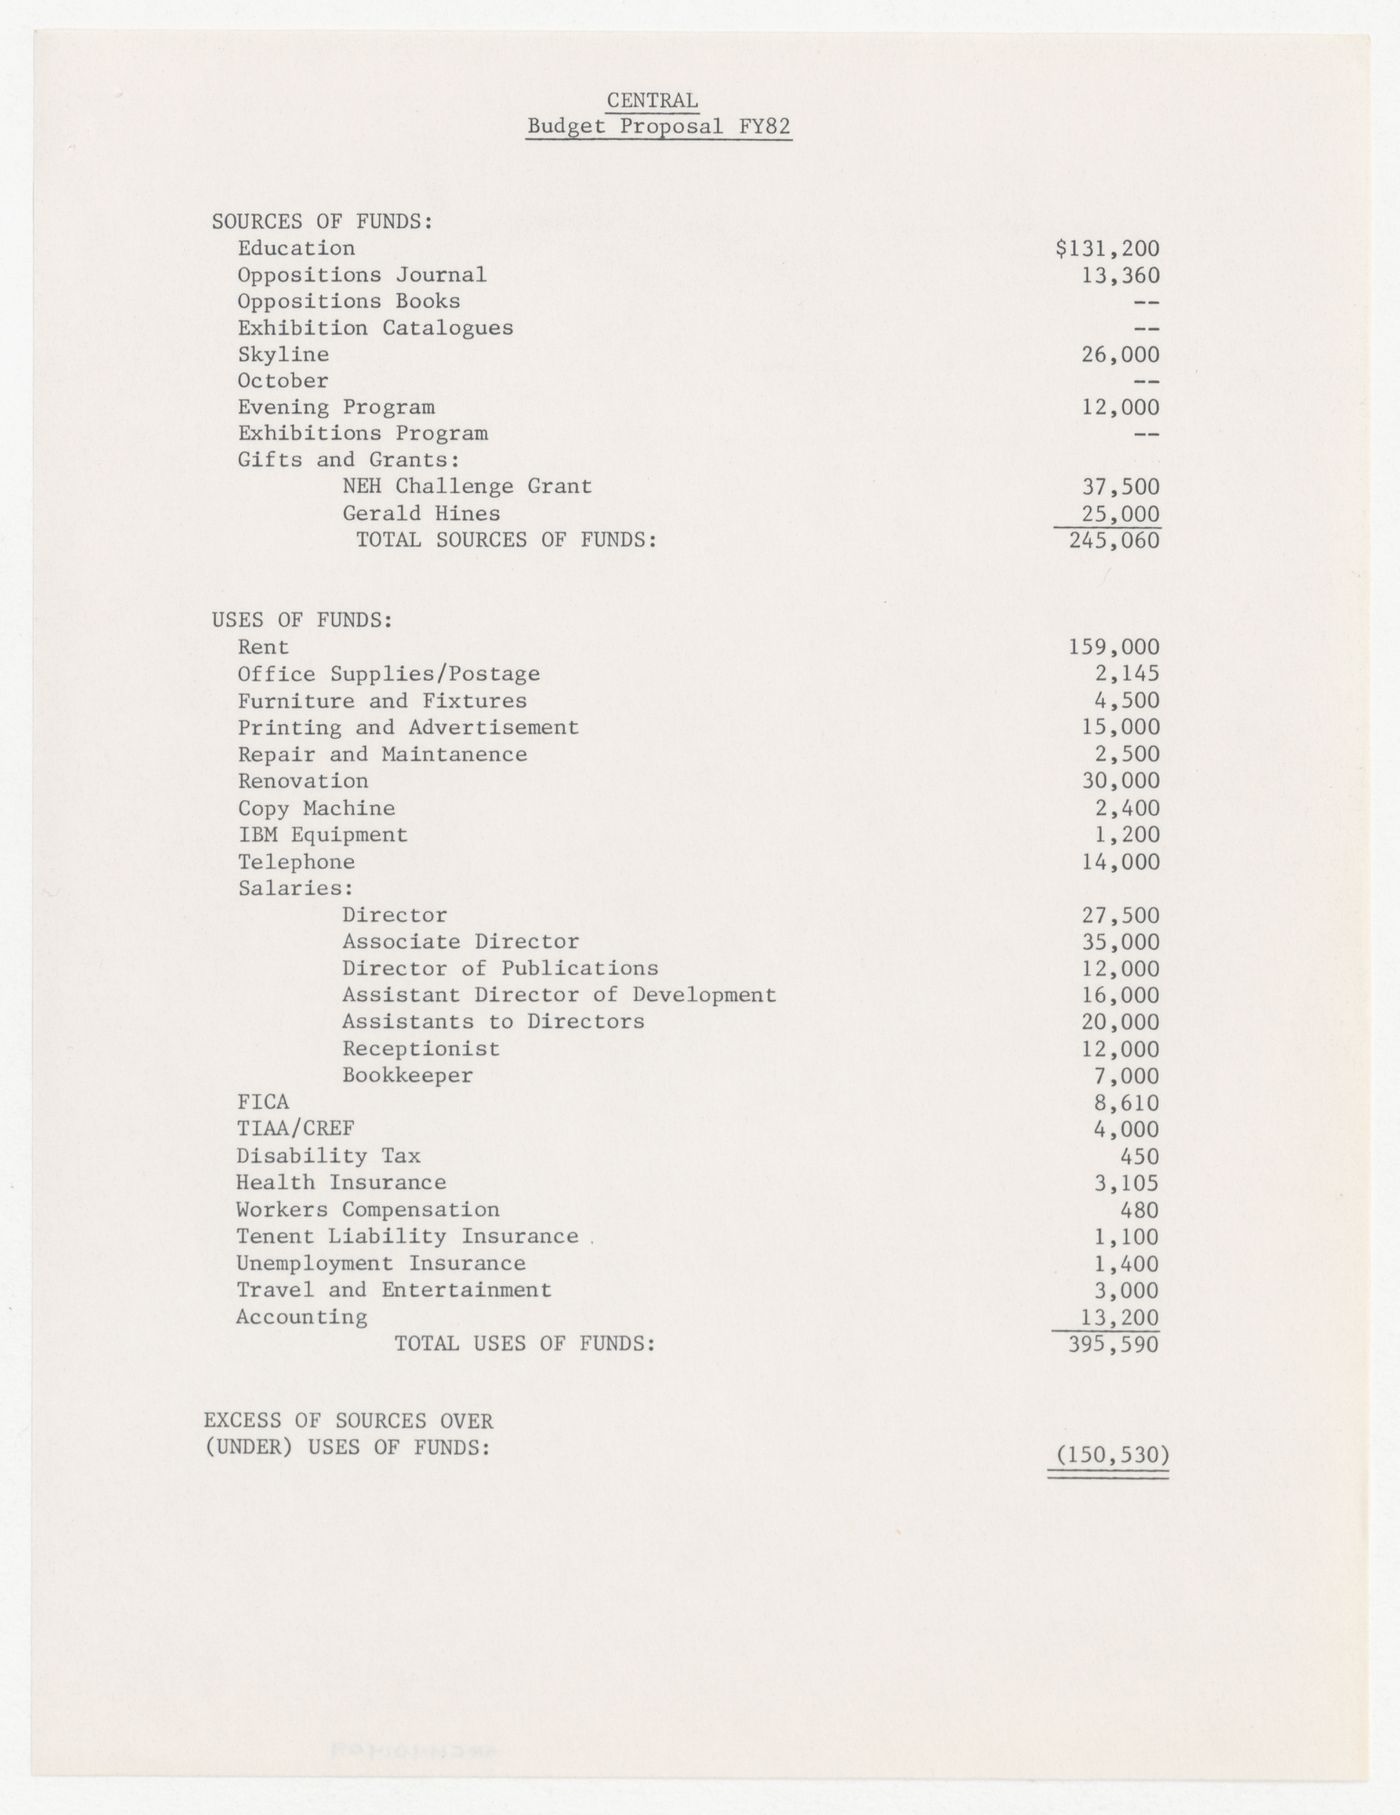 Budget proposal for financial year 1982